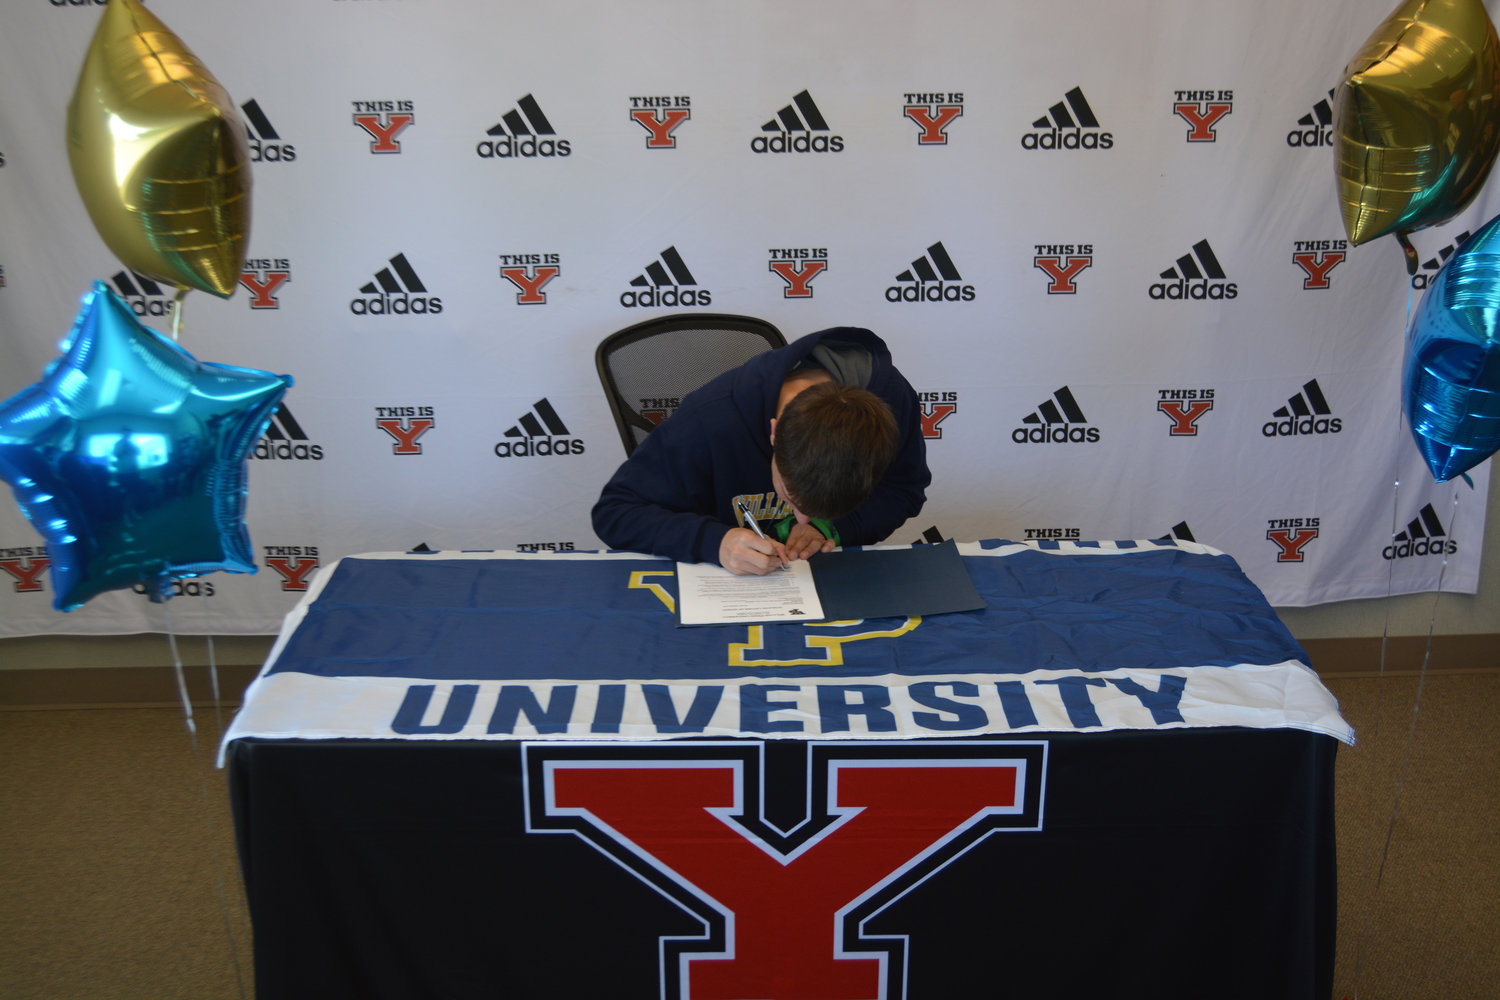 Yelm wrestler Jeffrey Myers puts ink to paper to officially join the William Penn University wrestling team.